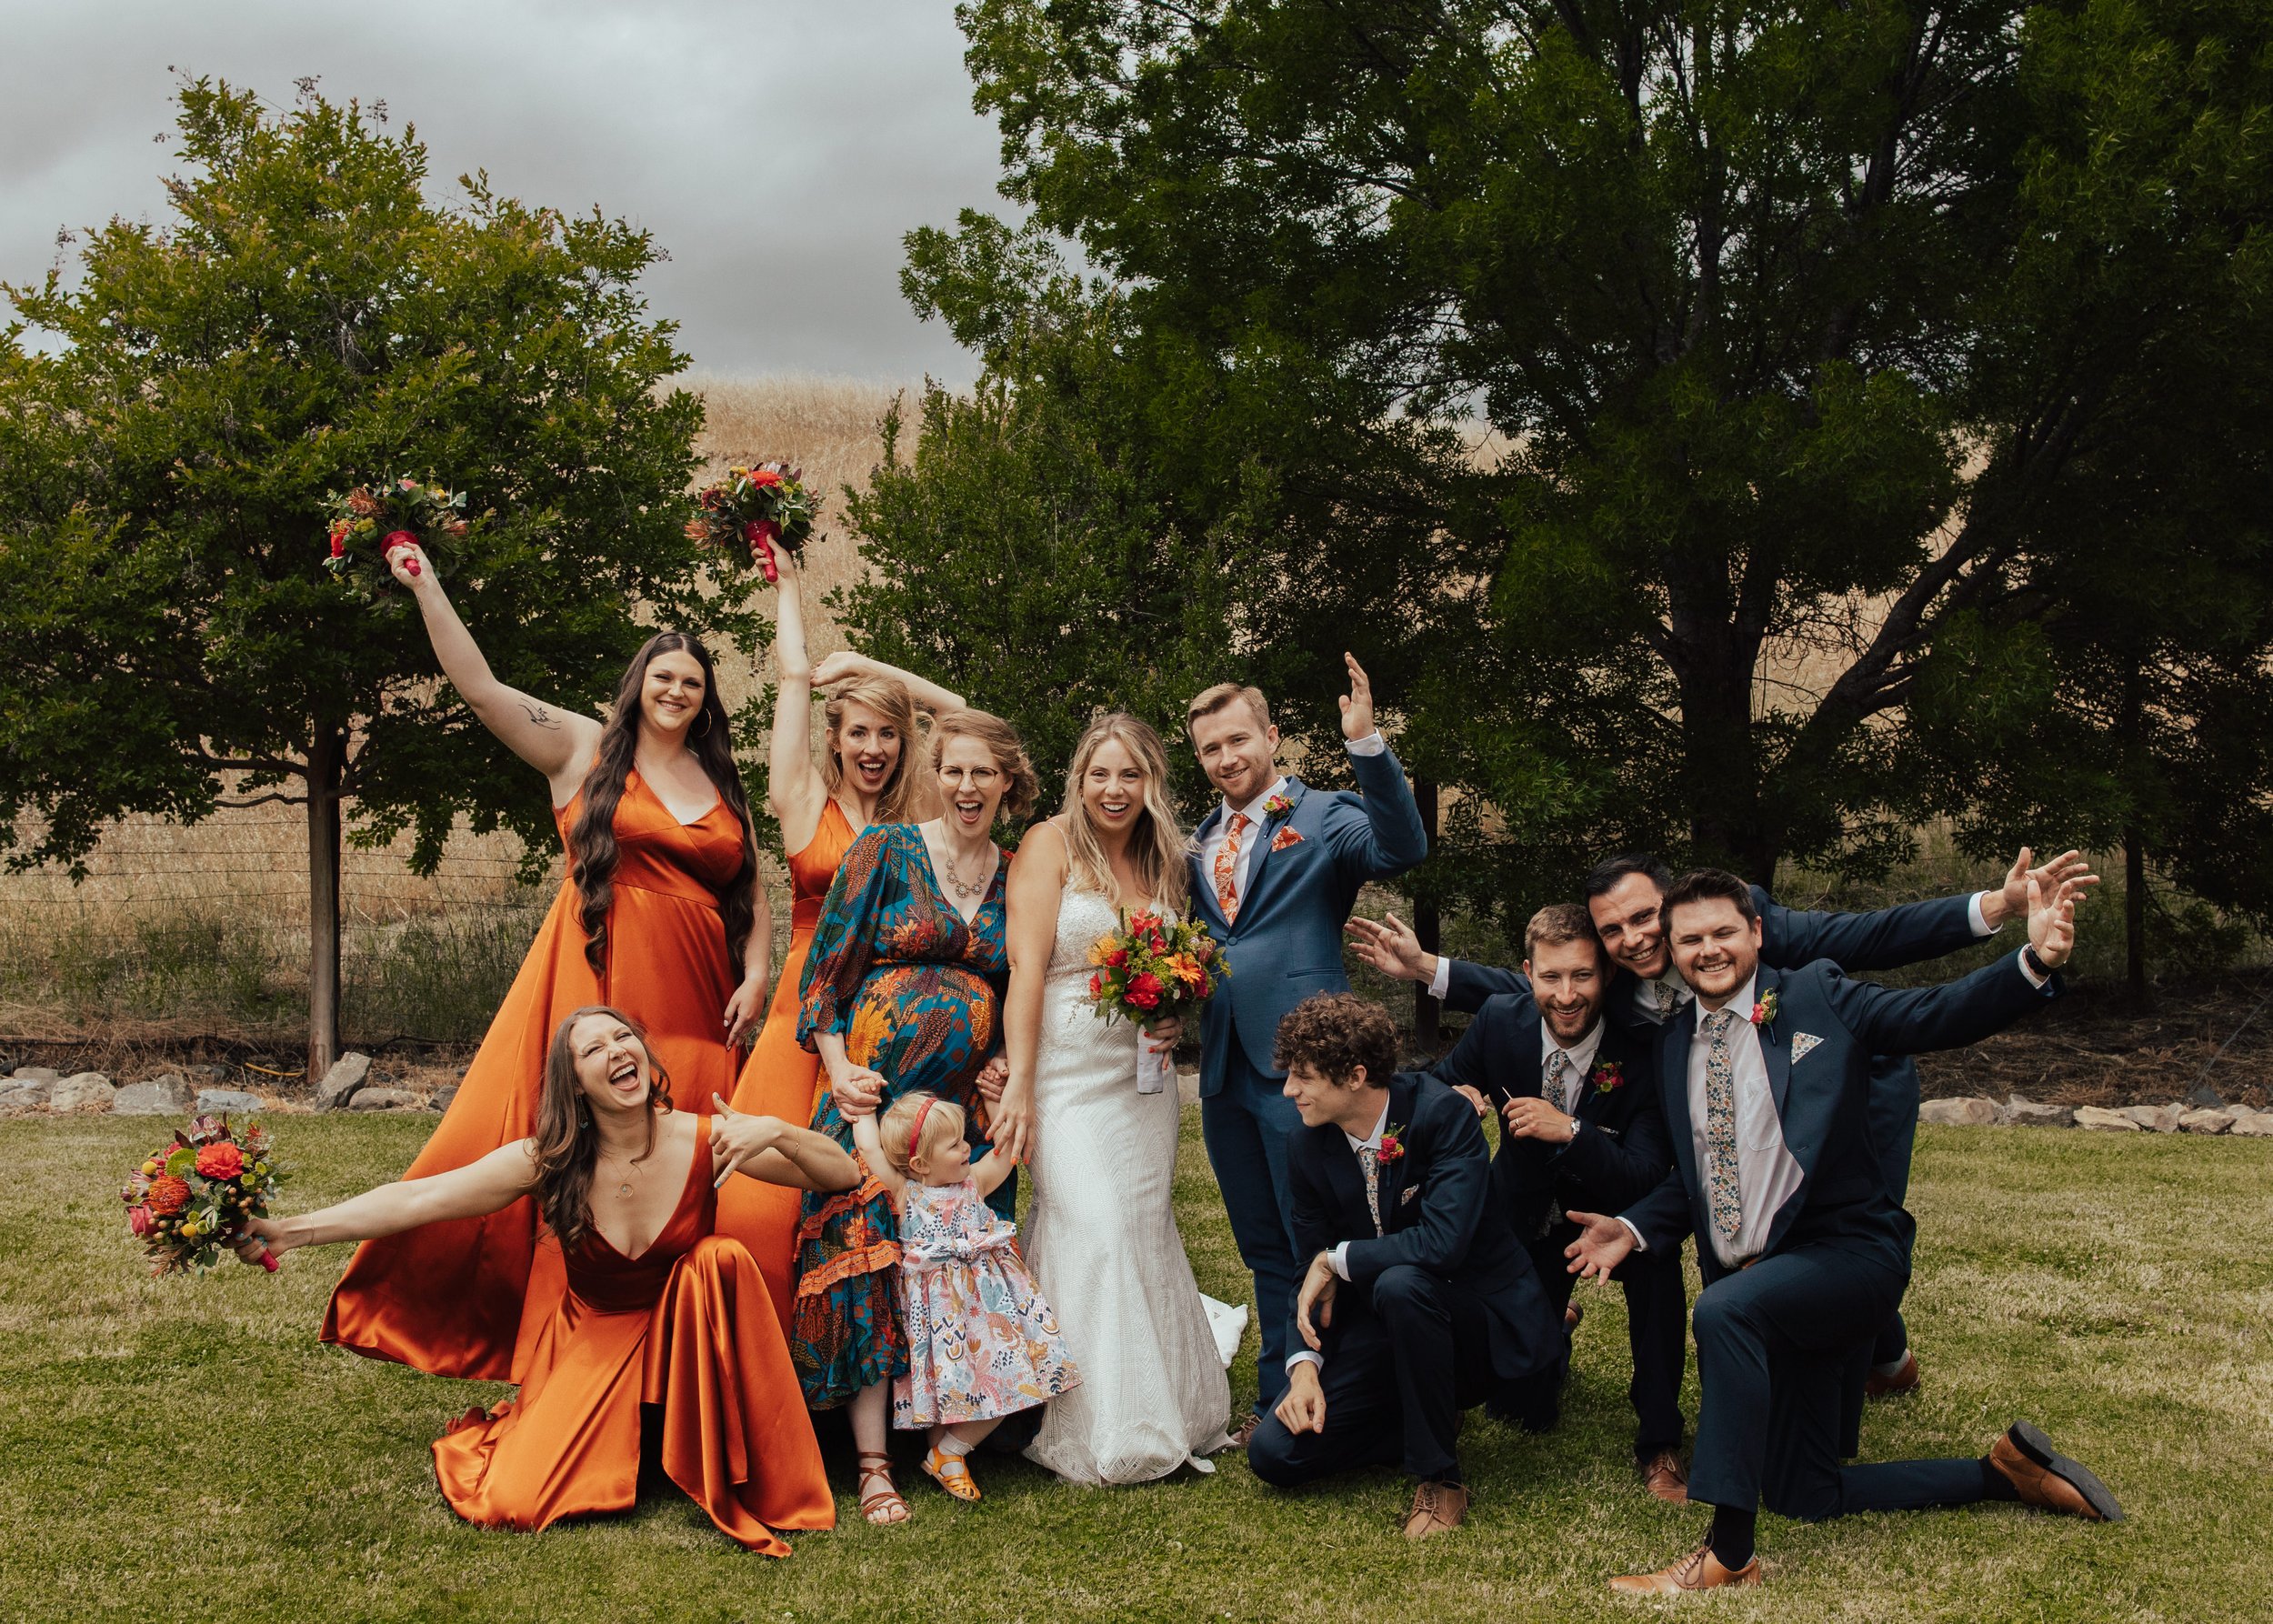 An Intimate Colorful Wedding Day